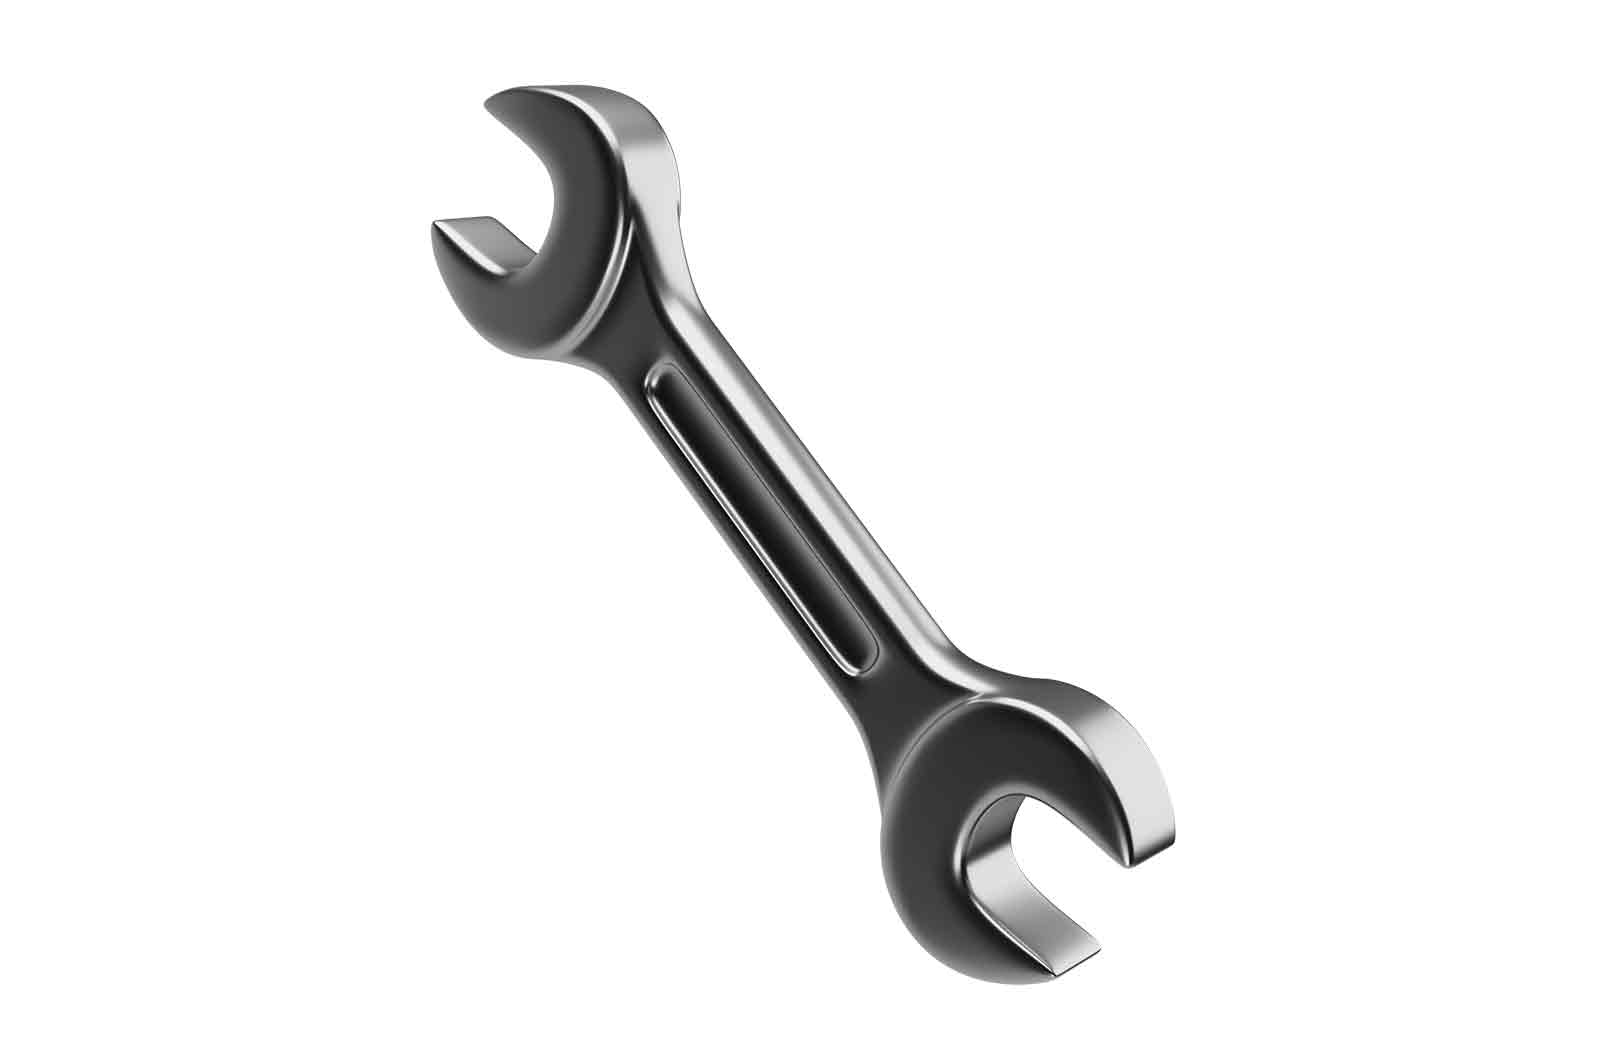 Double-ended open wrench, 3d rendered illustration. A hand tool used for loosening or tightening nuts and bolts of different sizes.